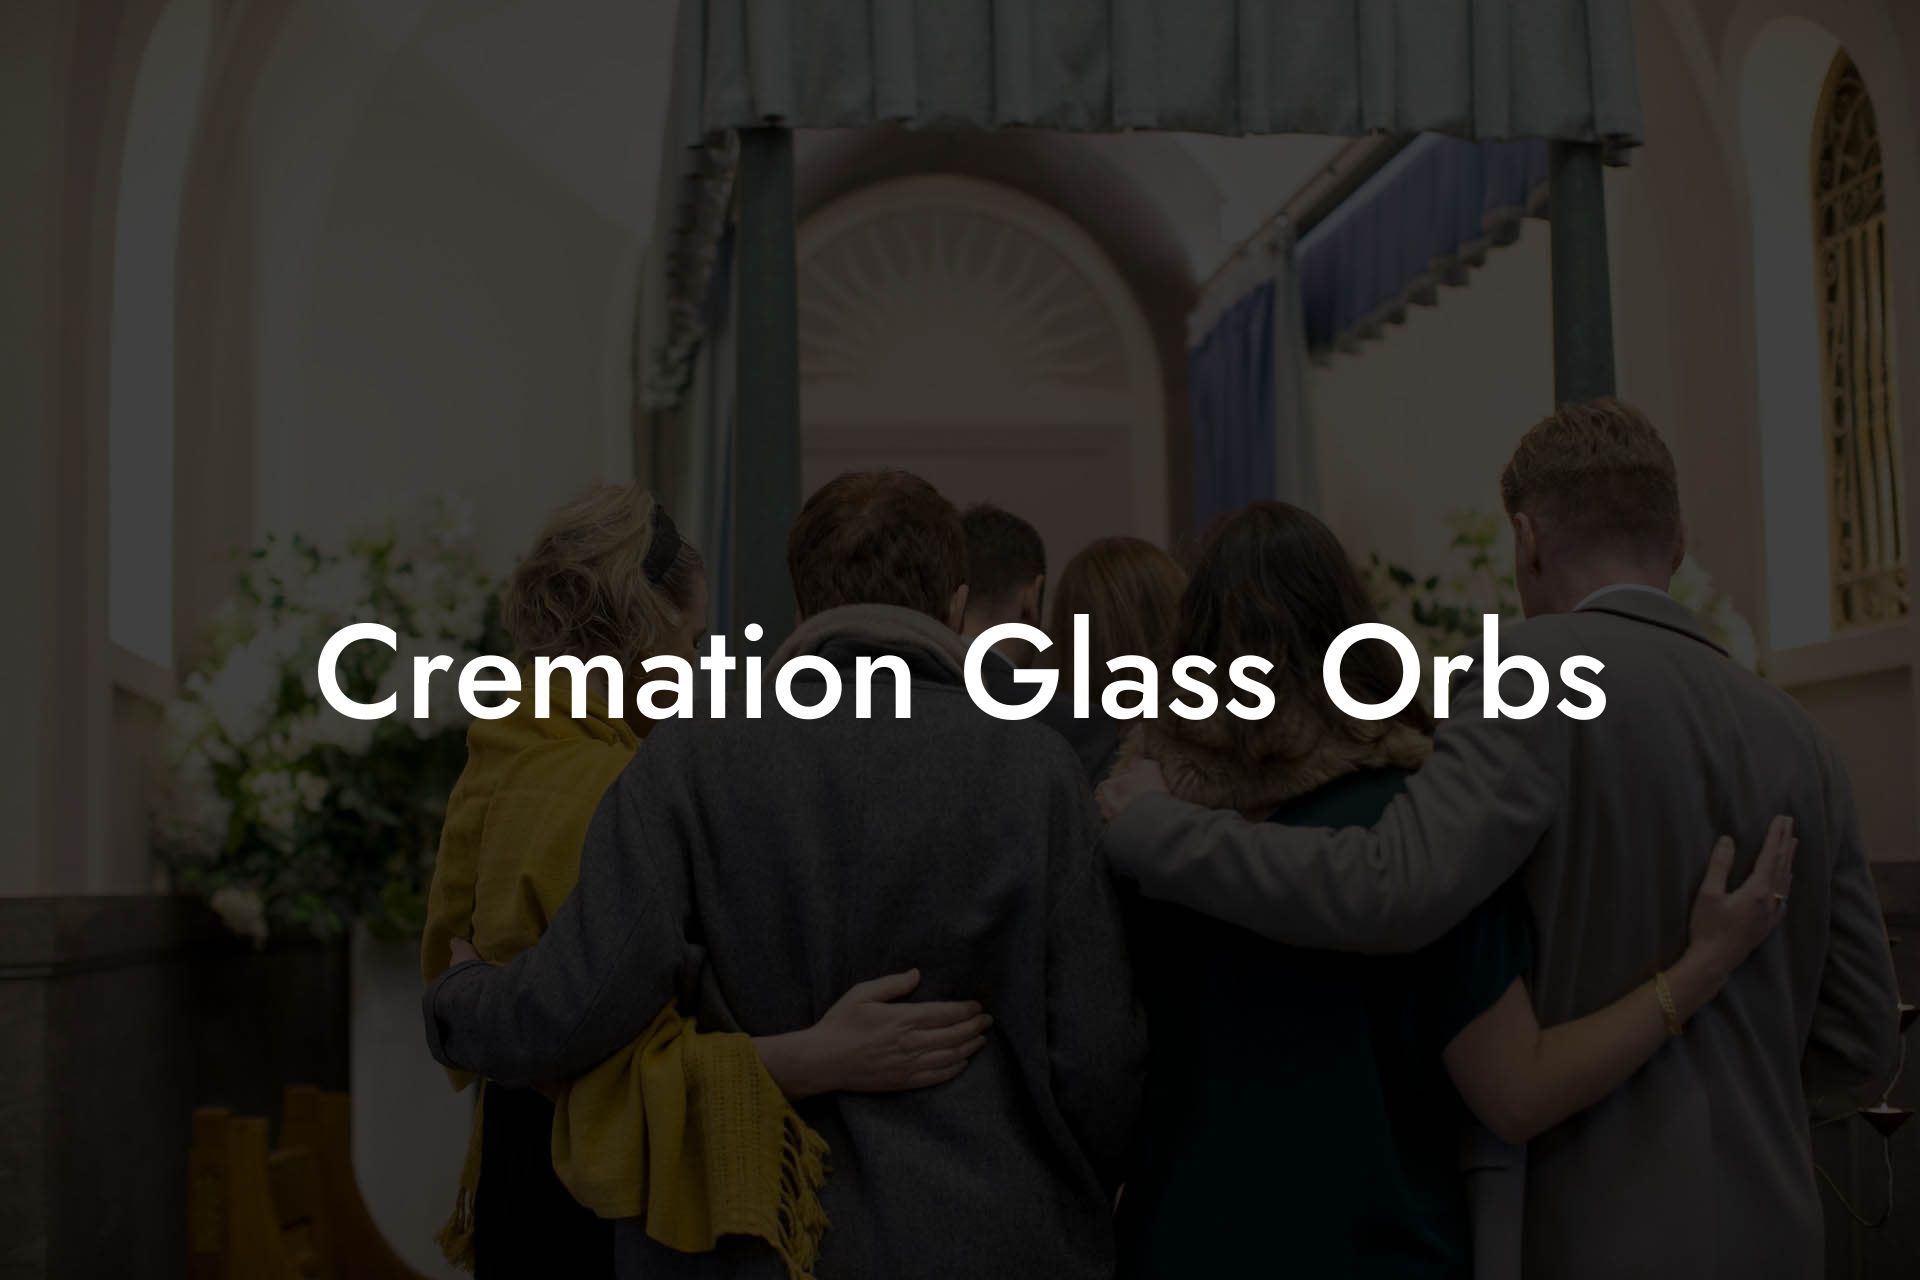 Cremation Glass Orbs